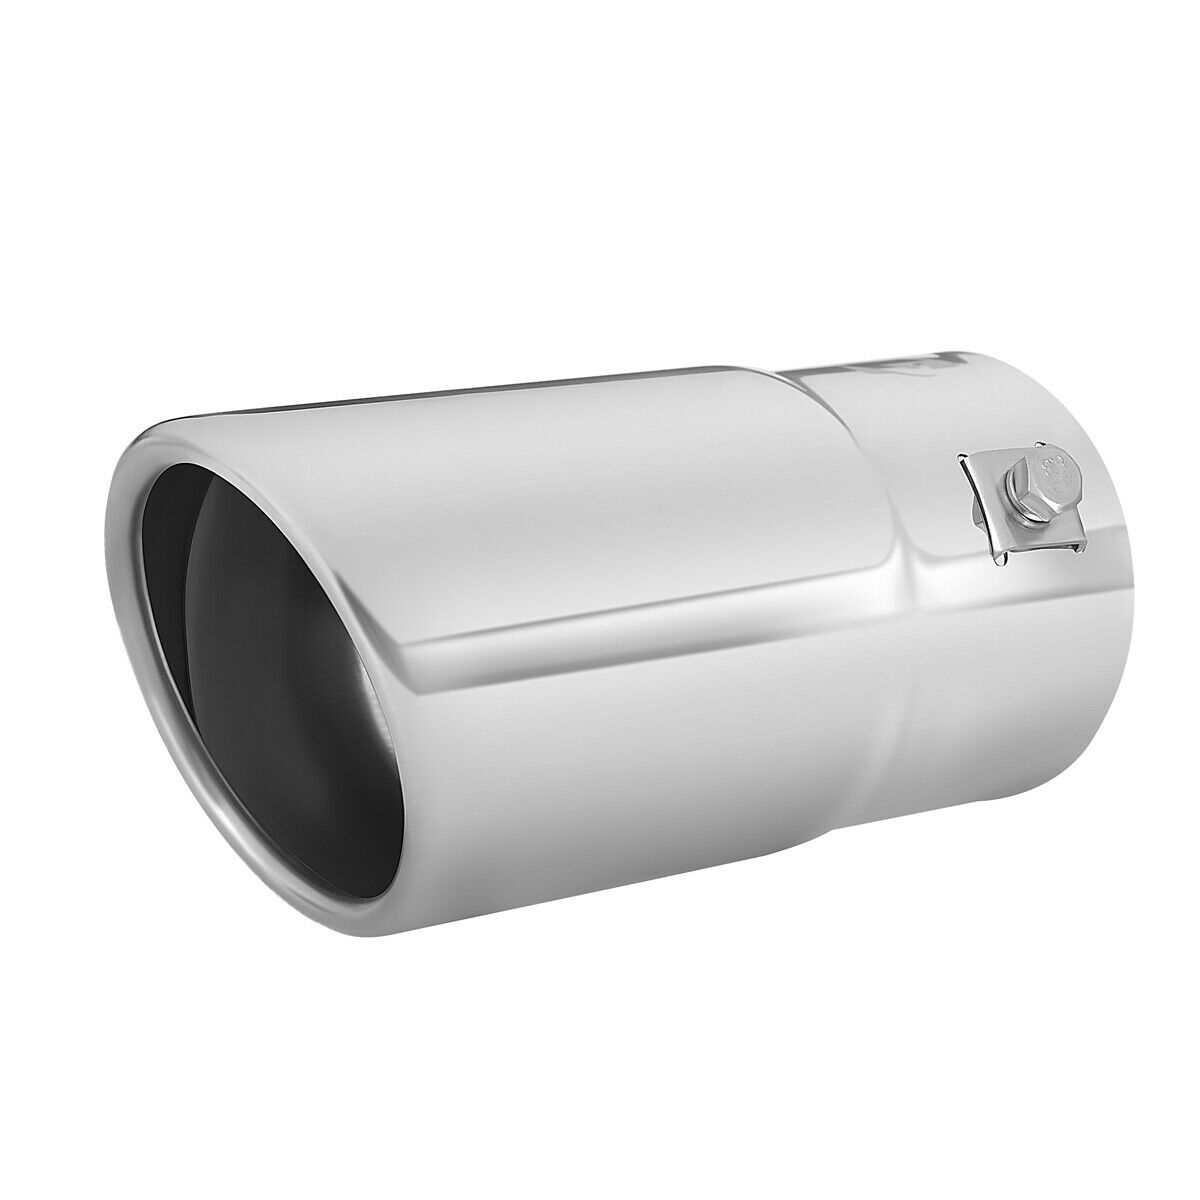 Car Muffler Tip Exhaust Pipe, Stainless Steel Chrome Effect, Fit 1.75-2.5 Inch ⌀